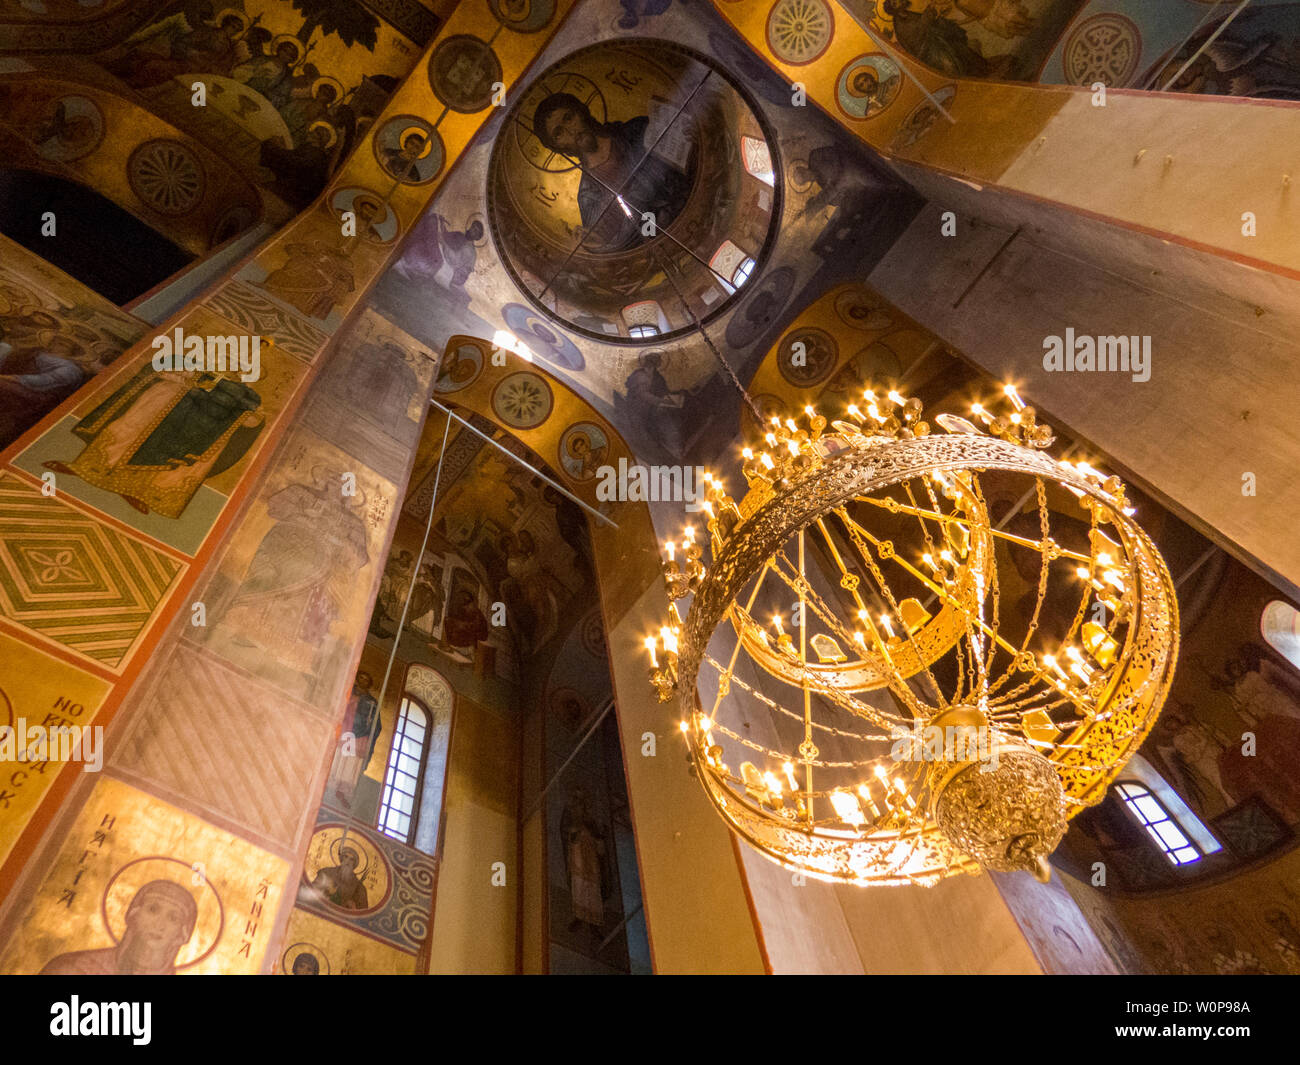 VELIKY NOVGOROD, RUSSIA - APRIL 24, 2019: View of the interior of the St. George's Cathedral (Russian: Sobor Georgiya Pobedonostsa) in the Yuriev Mona Stock Photo